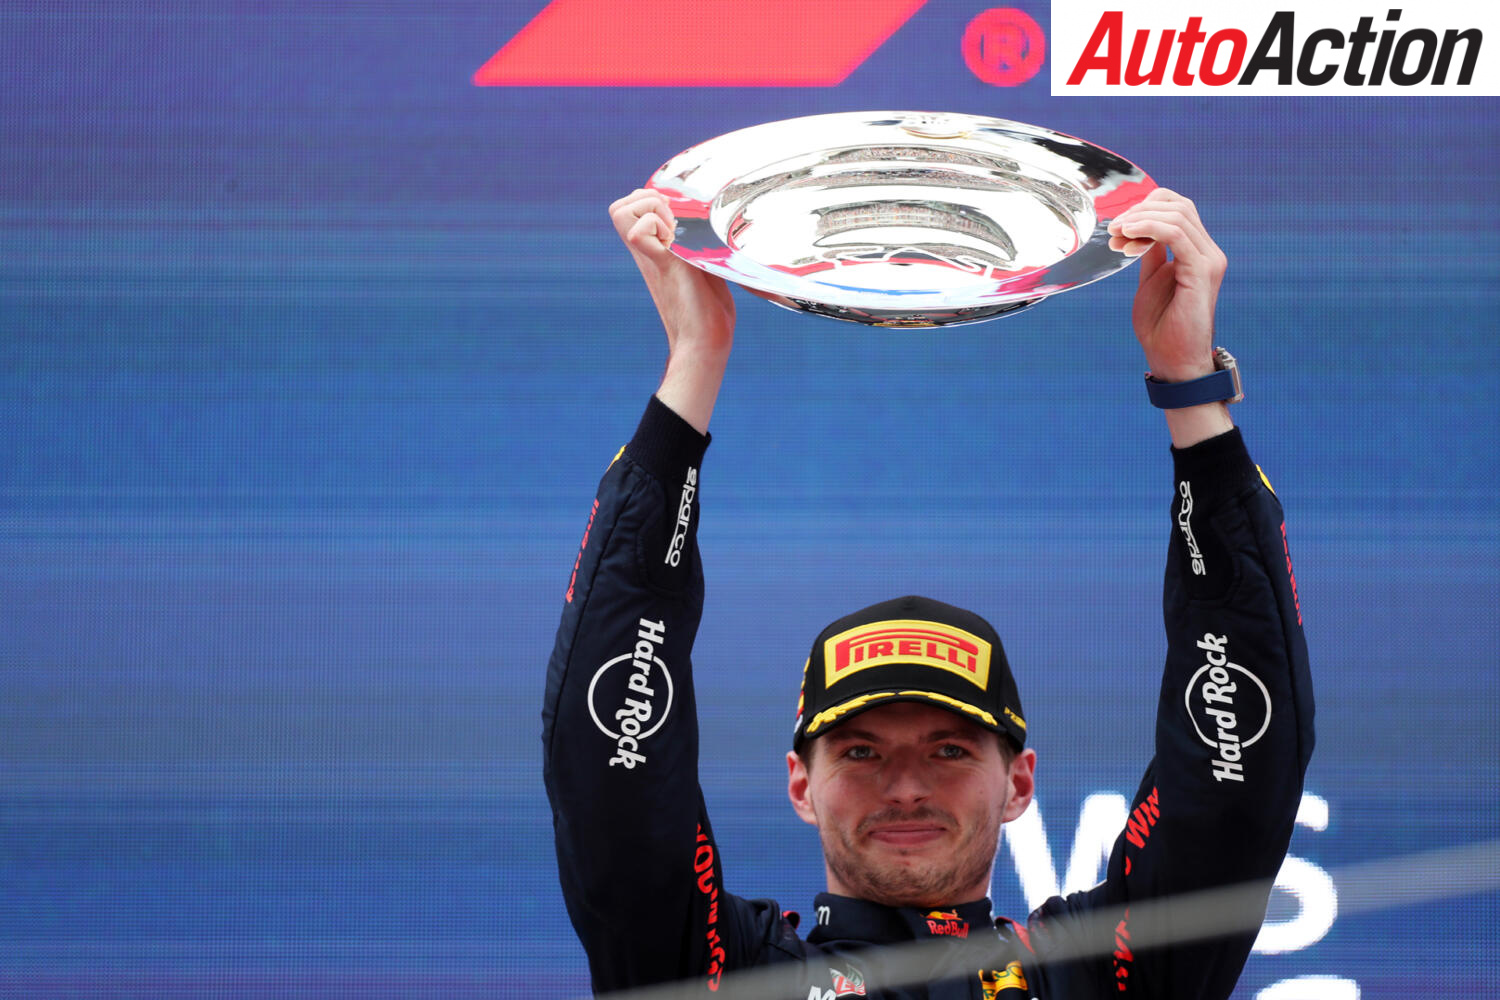 Max Verstappen Cruises To Victory In Spanish GP - Auto Action